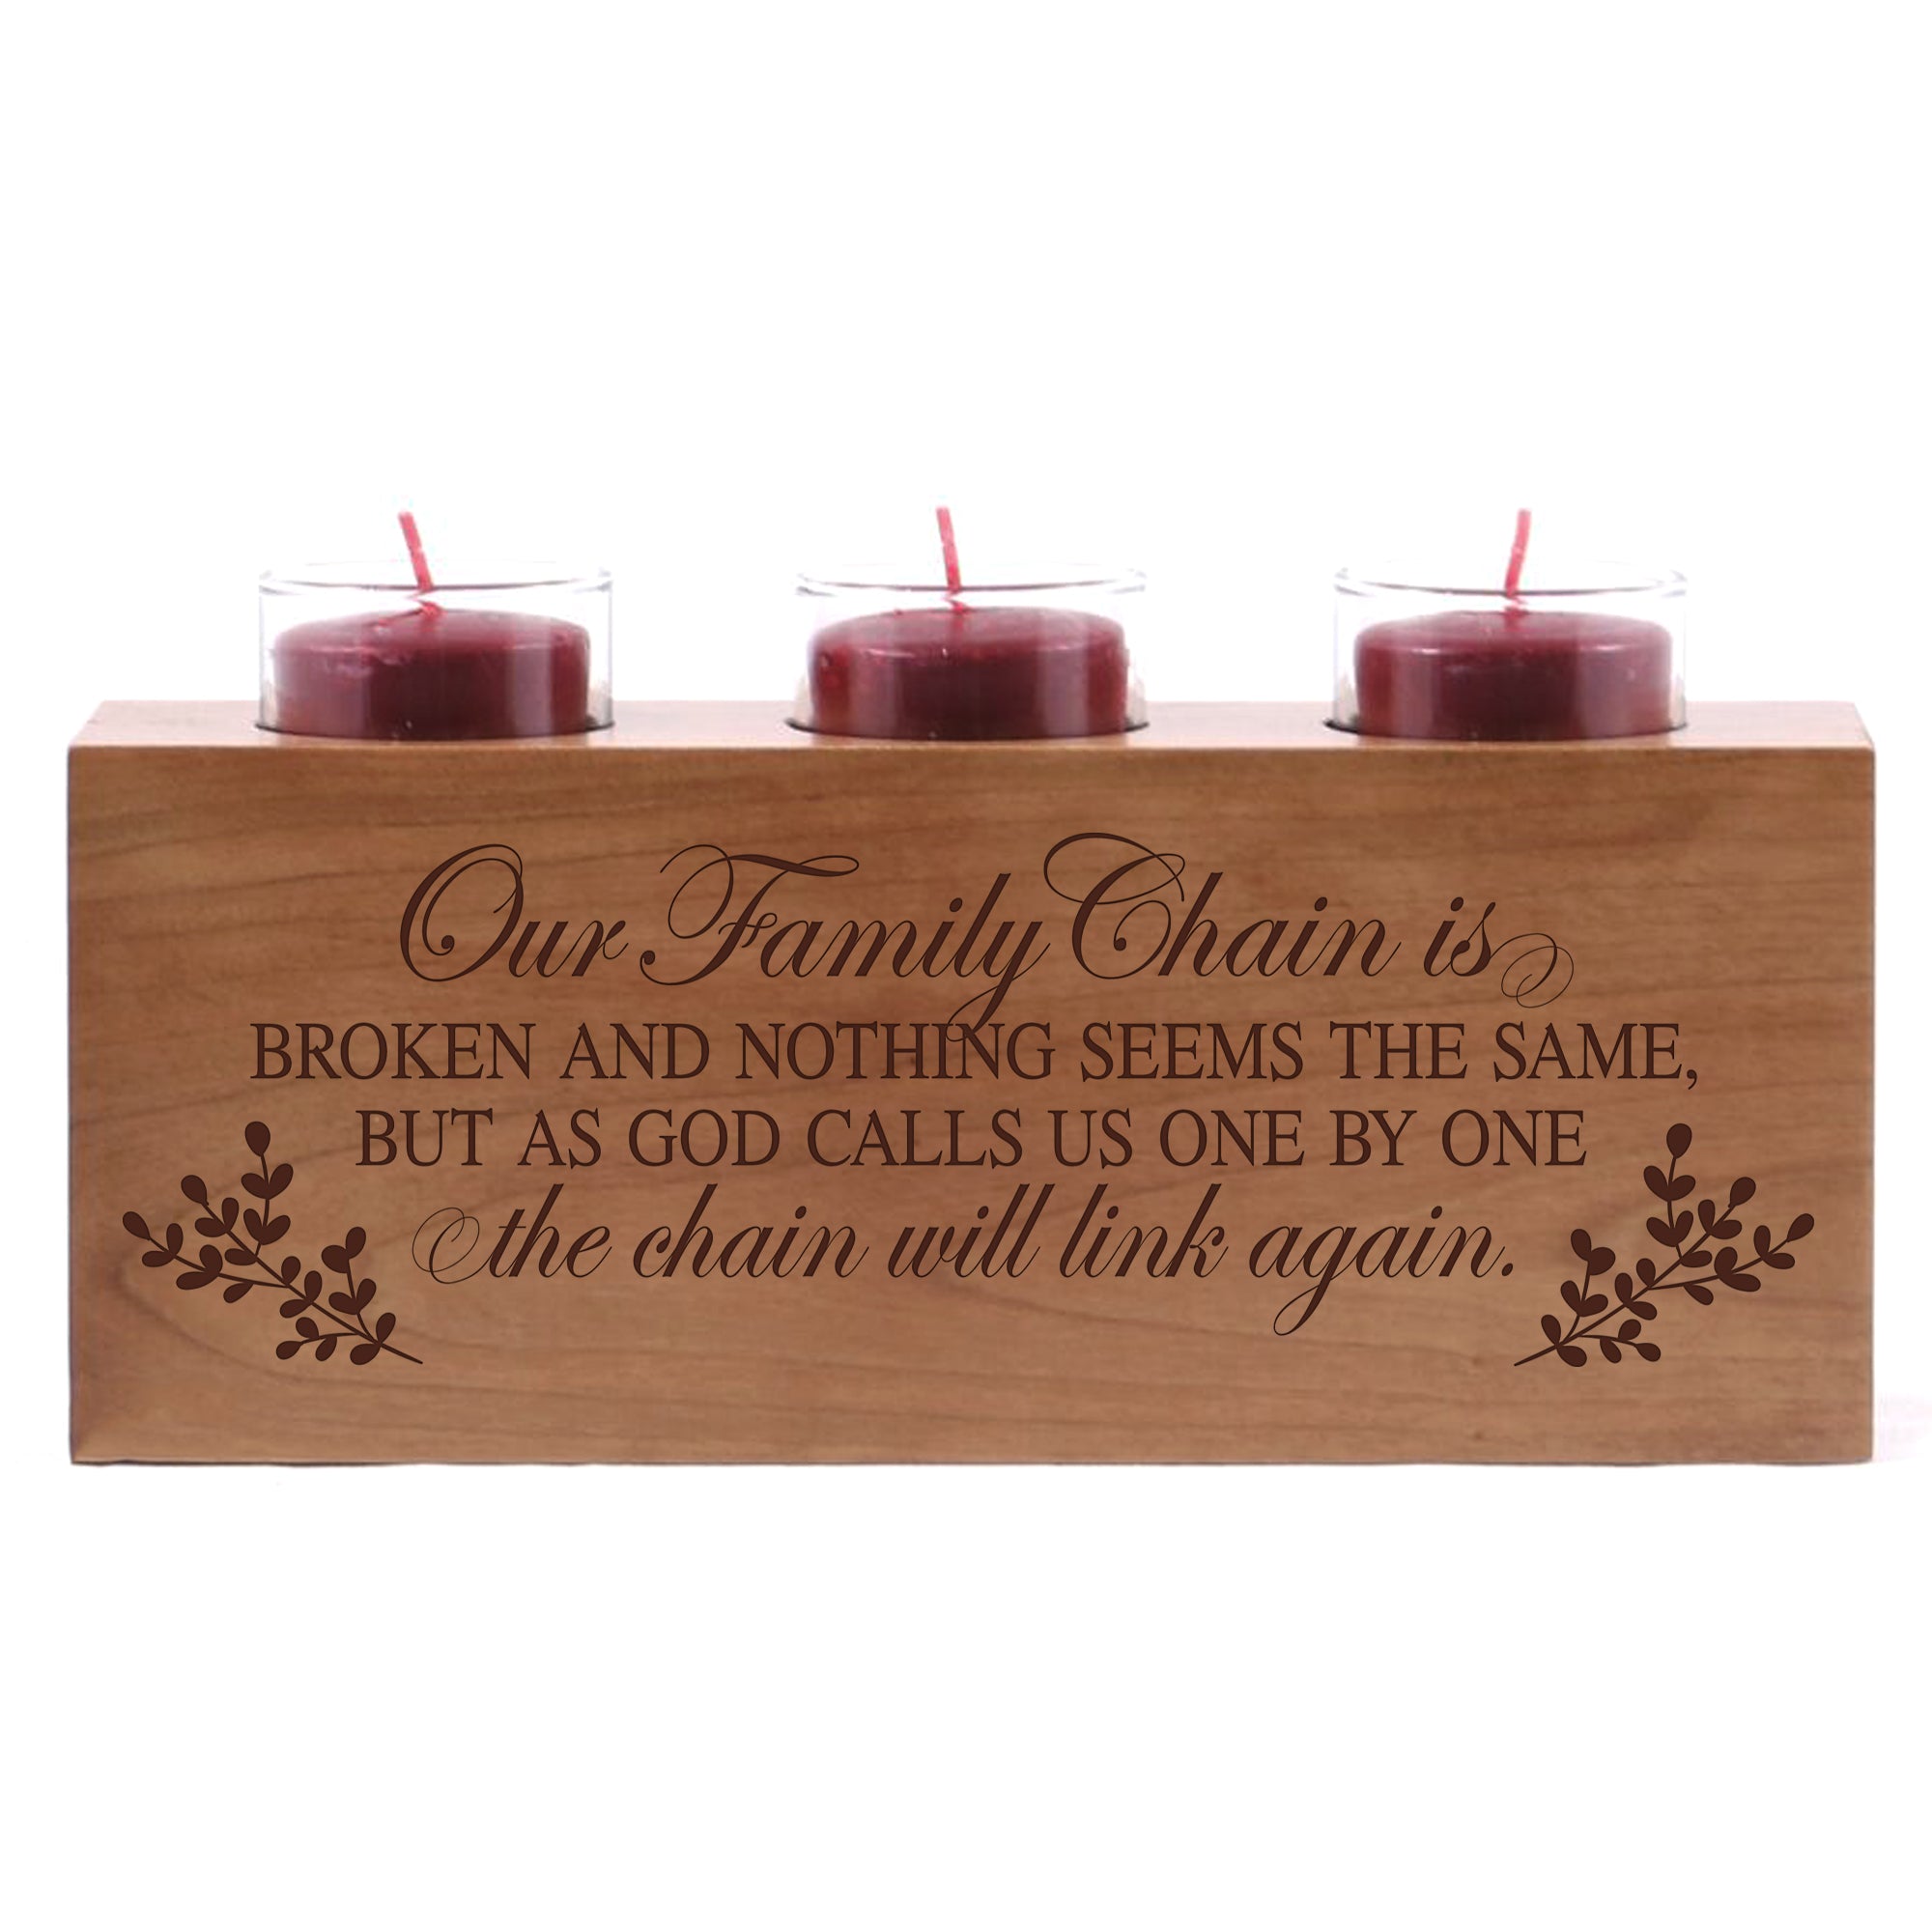 LifeSong Milestones Memorial Funeral Candle Holder Those Who We Love Don't Go Away engraved cherry wood keepsake ideas for Loved One 10" L x 4" H